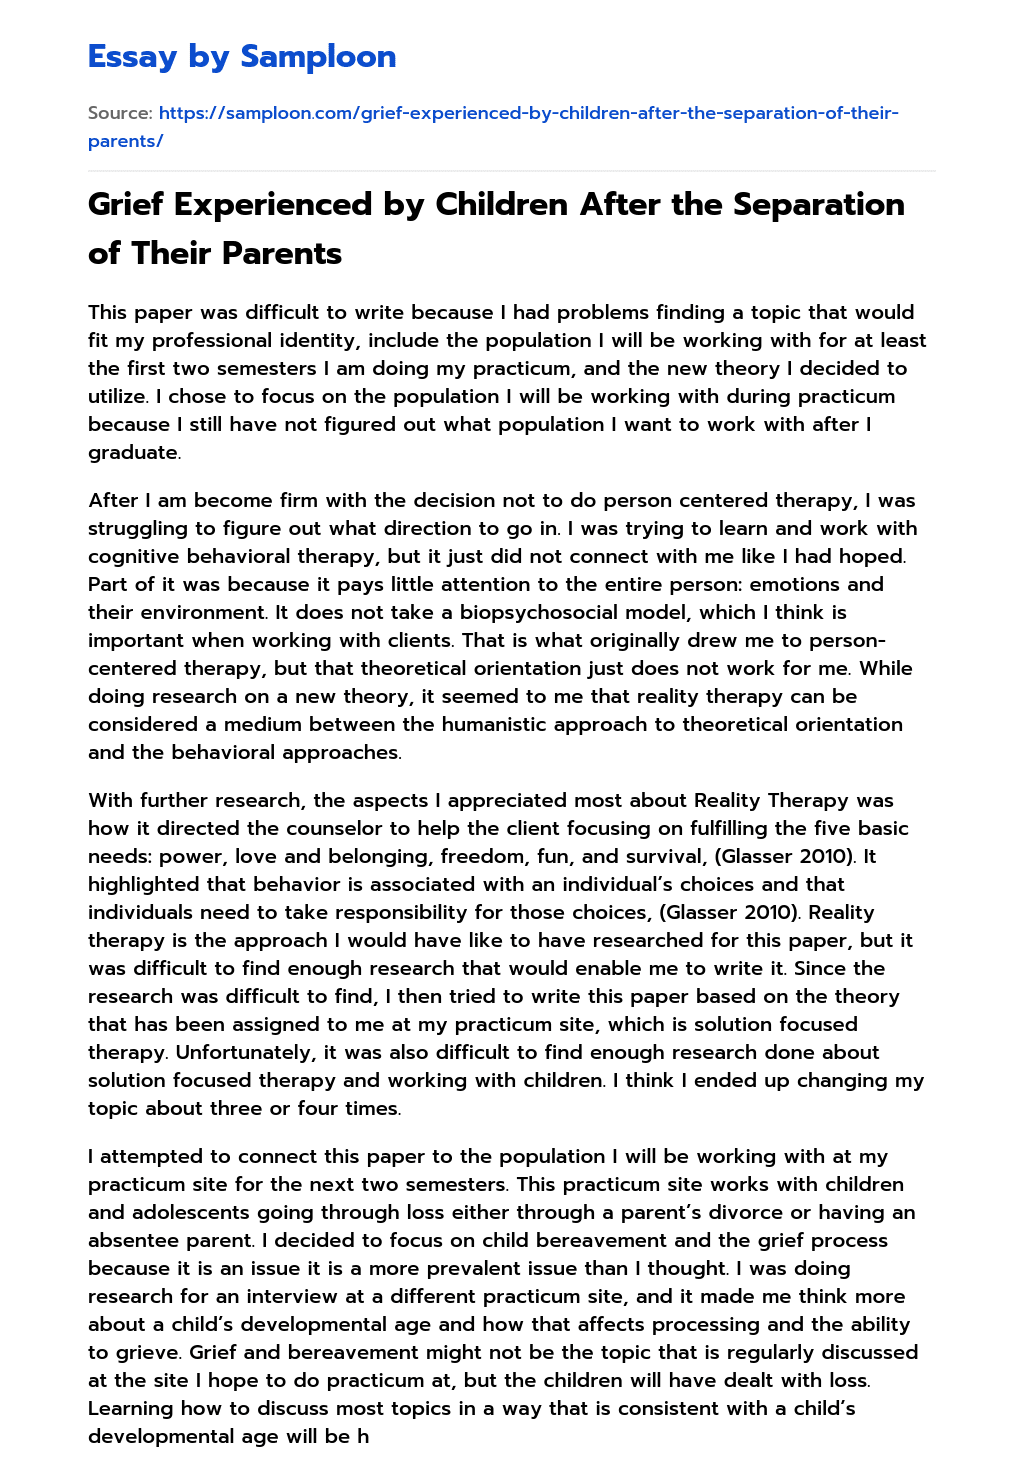 Grief Experienced by Children After the Separation of Their Parents essay